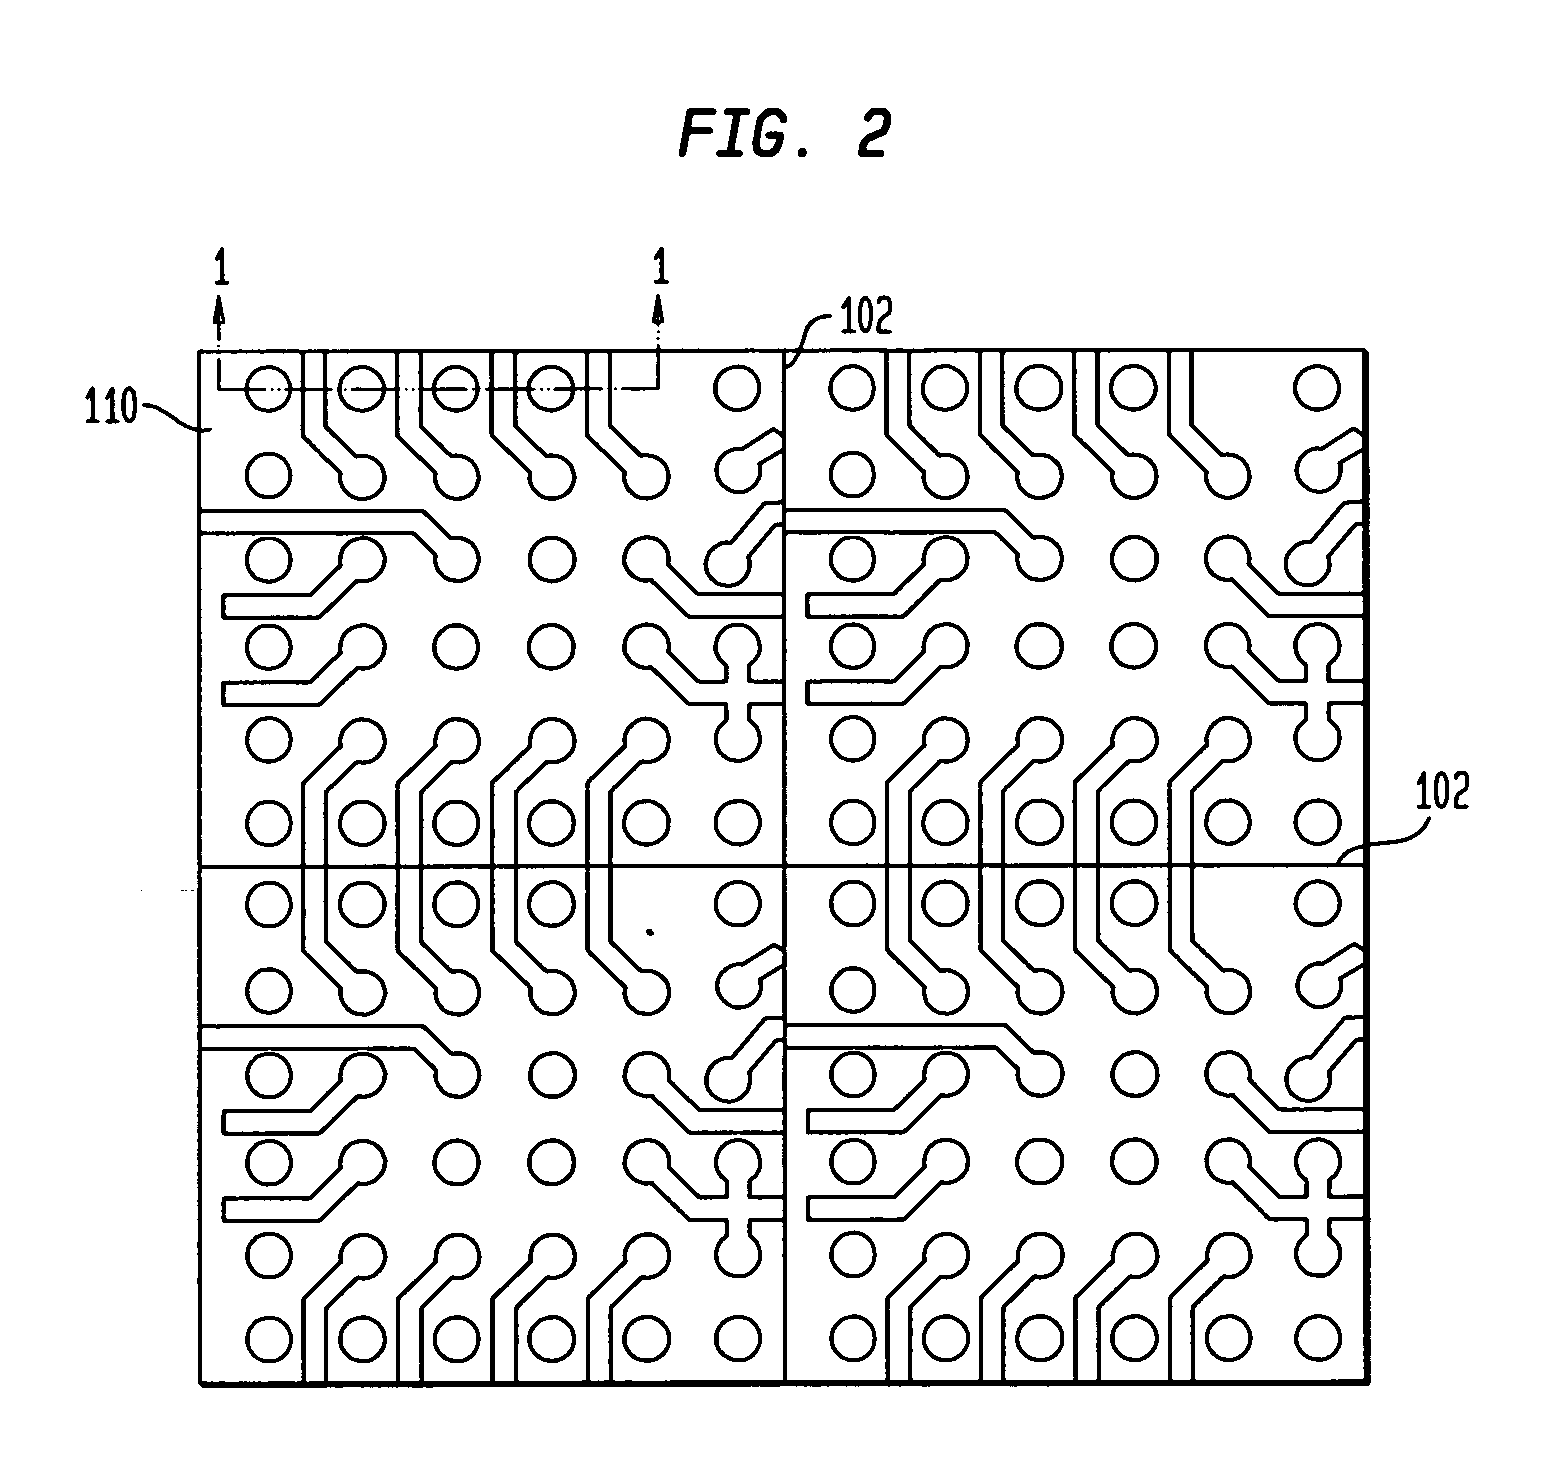 Microelectronic substrate or element having conductive pads and metal posts joined thereto using bond layer